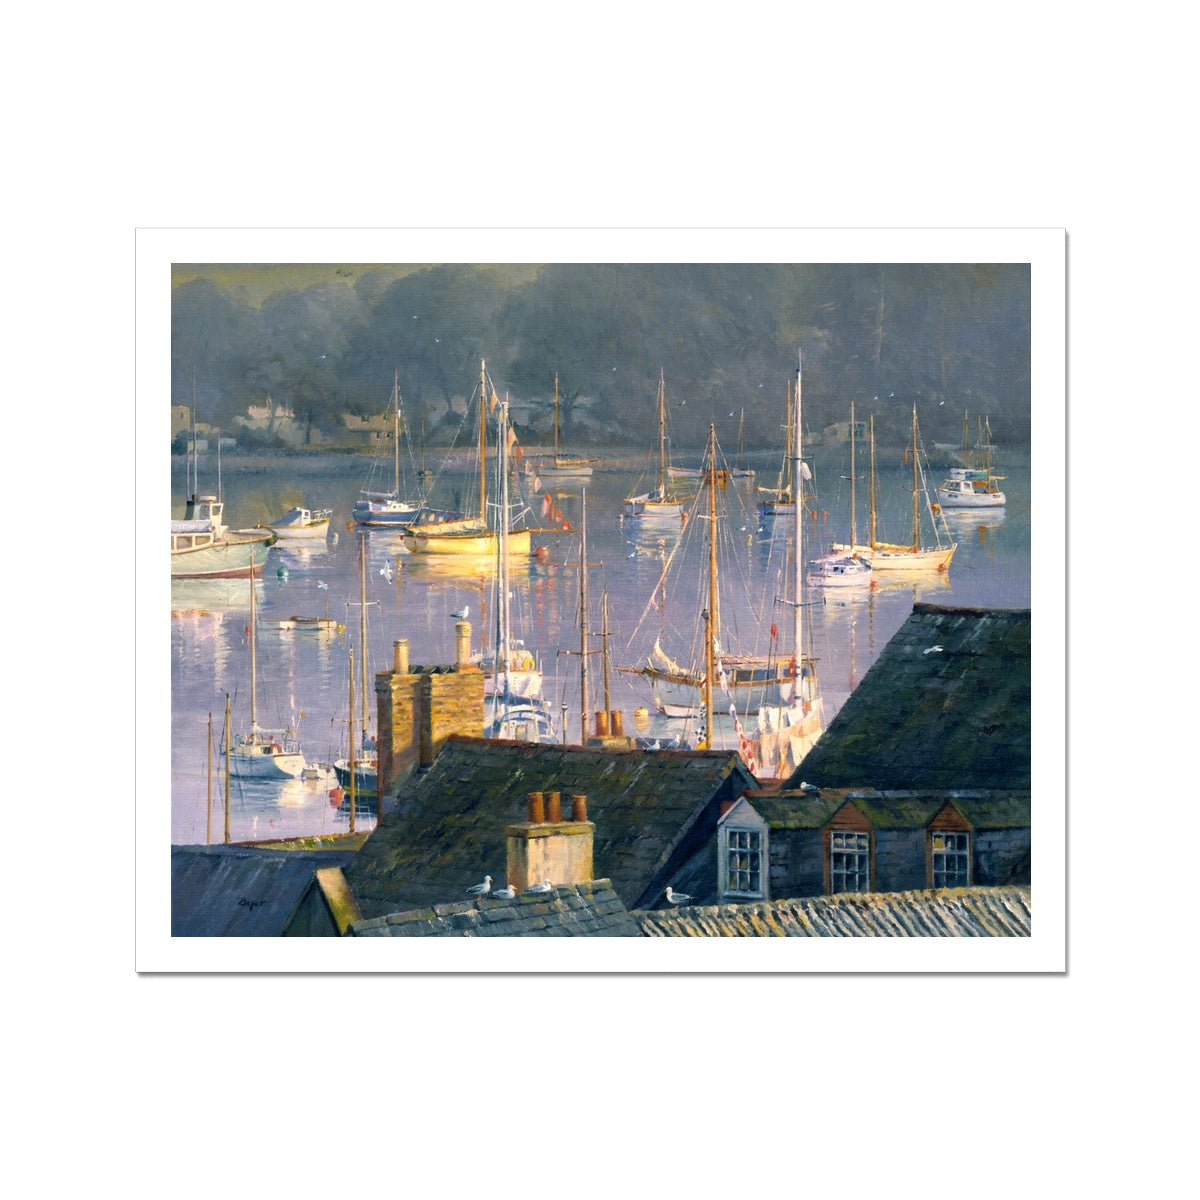 Ted Dyer Fine Art Print. Open Edition Cornish Art Print. 'Early Morning Calm, Falmouth Waterfront'. Cornwall Art Gallery